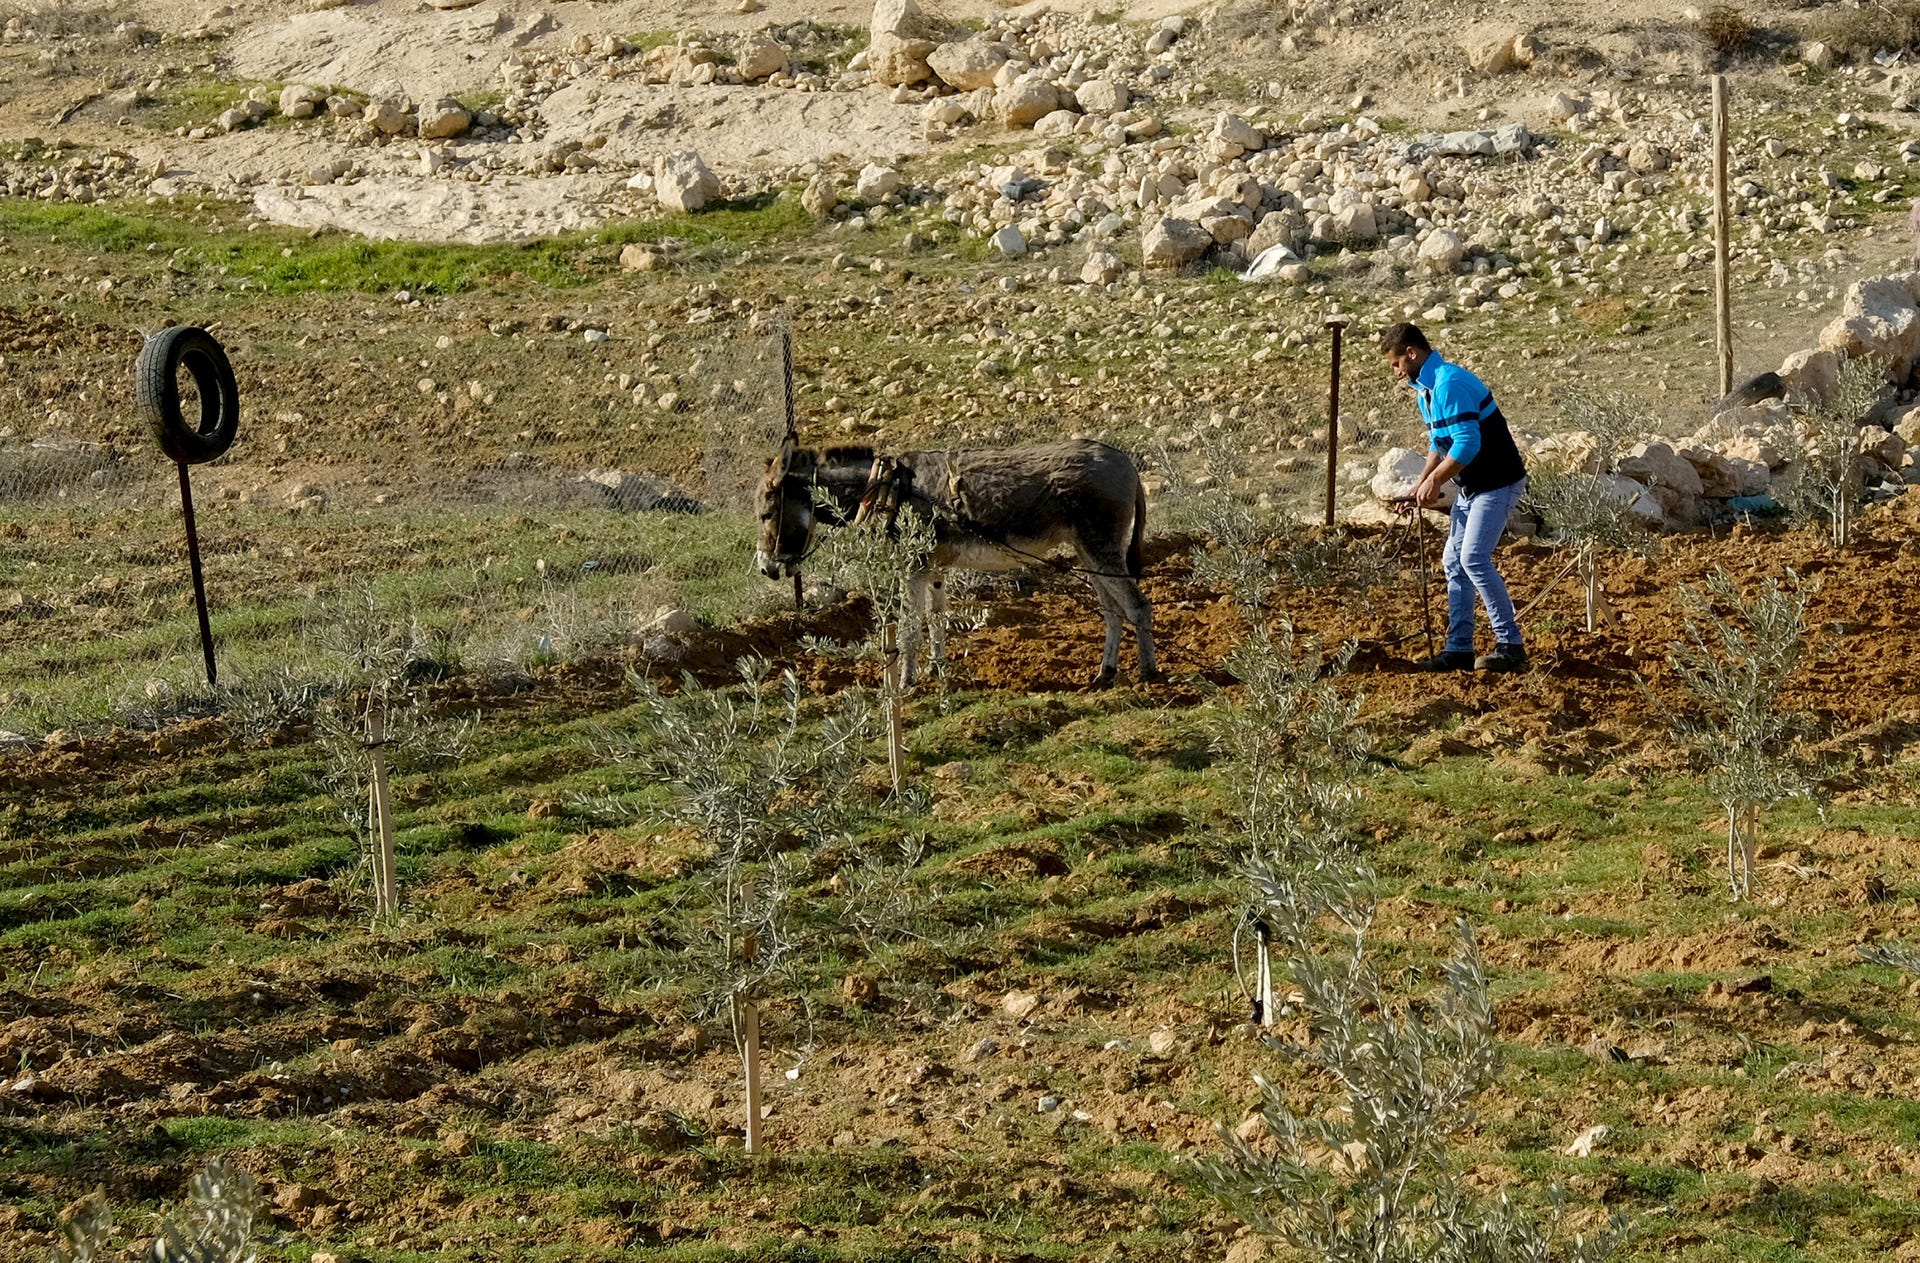 A man plows a field in the Yatta area, in the West Bank.